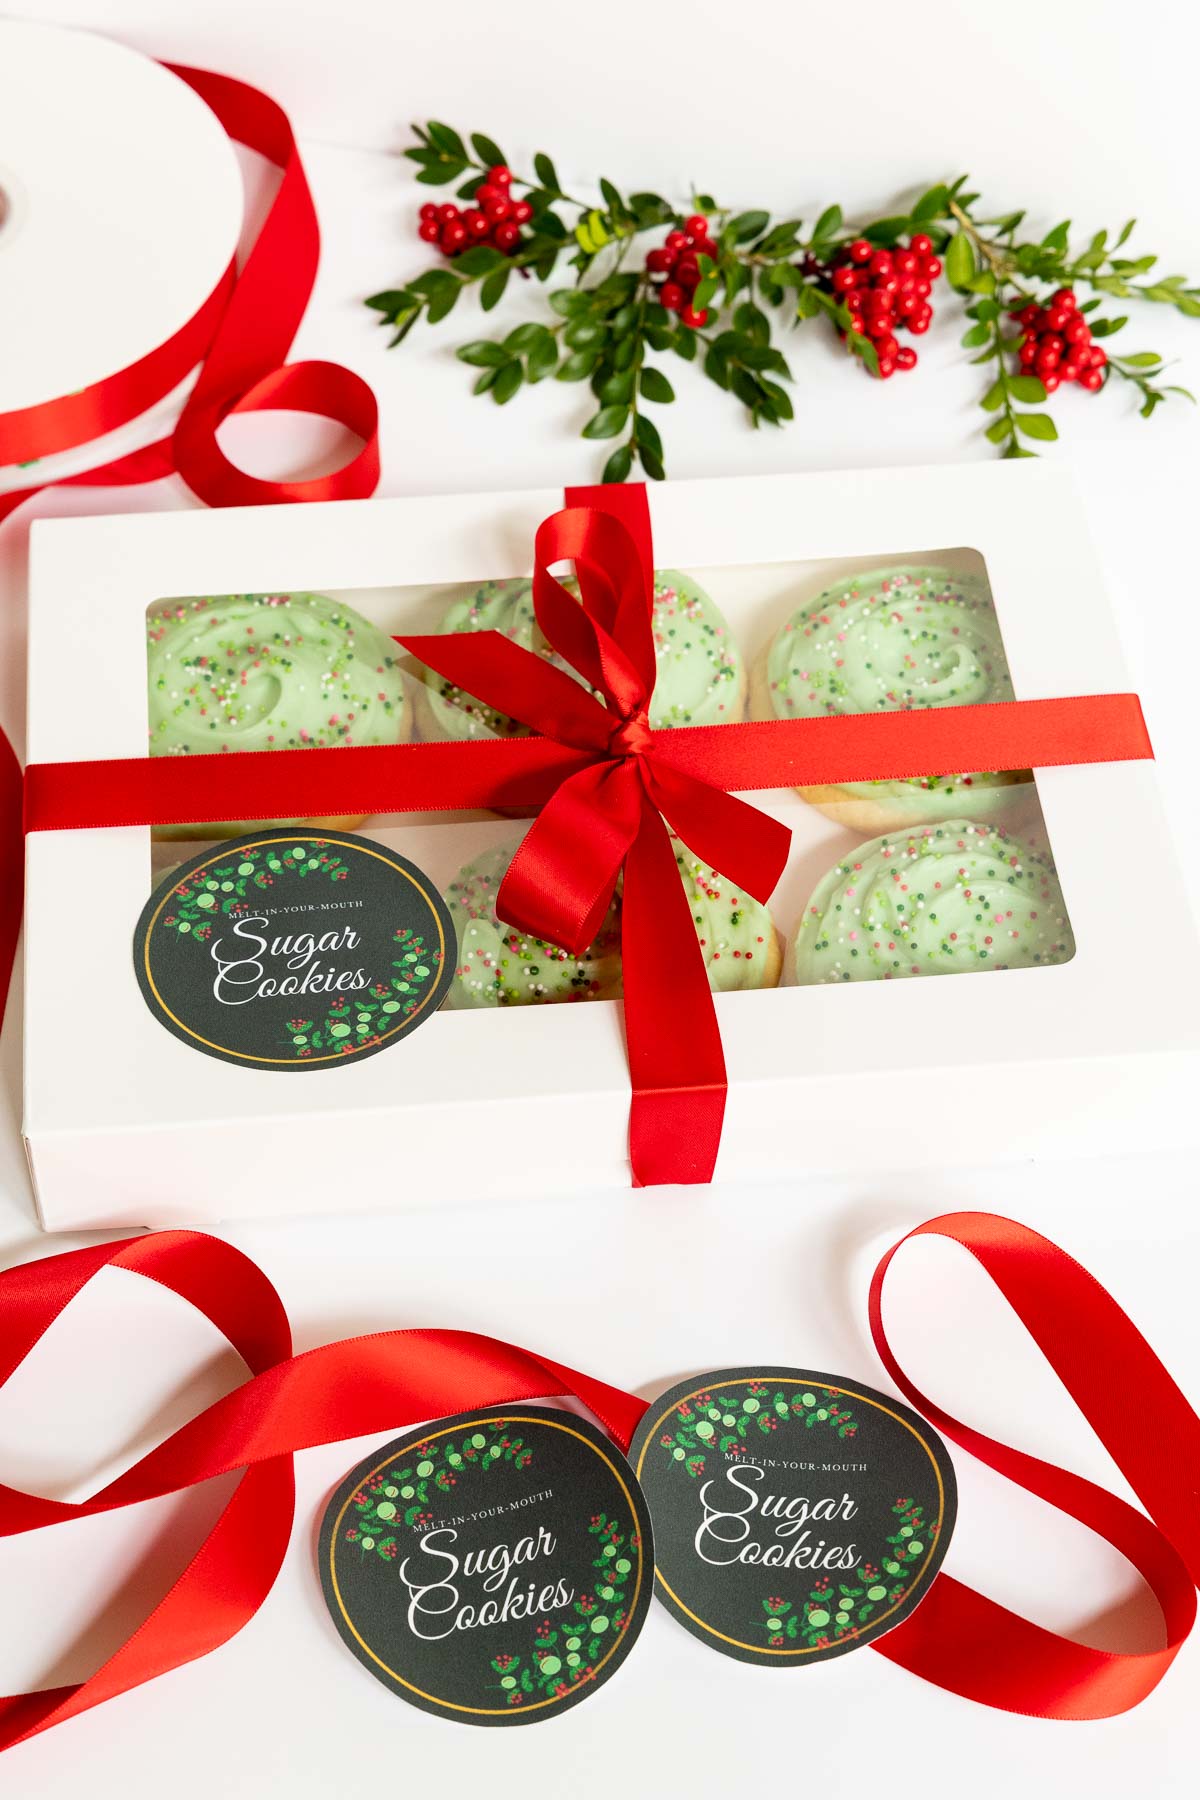 Vertical photo of Copycat Crumbl Christmas Sugar Cookies in gift boxes with red ribbon and custom gift labels.